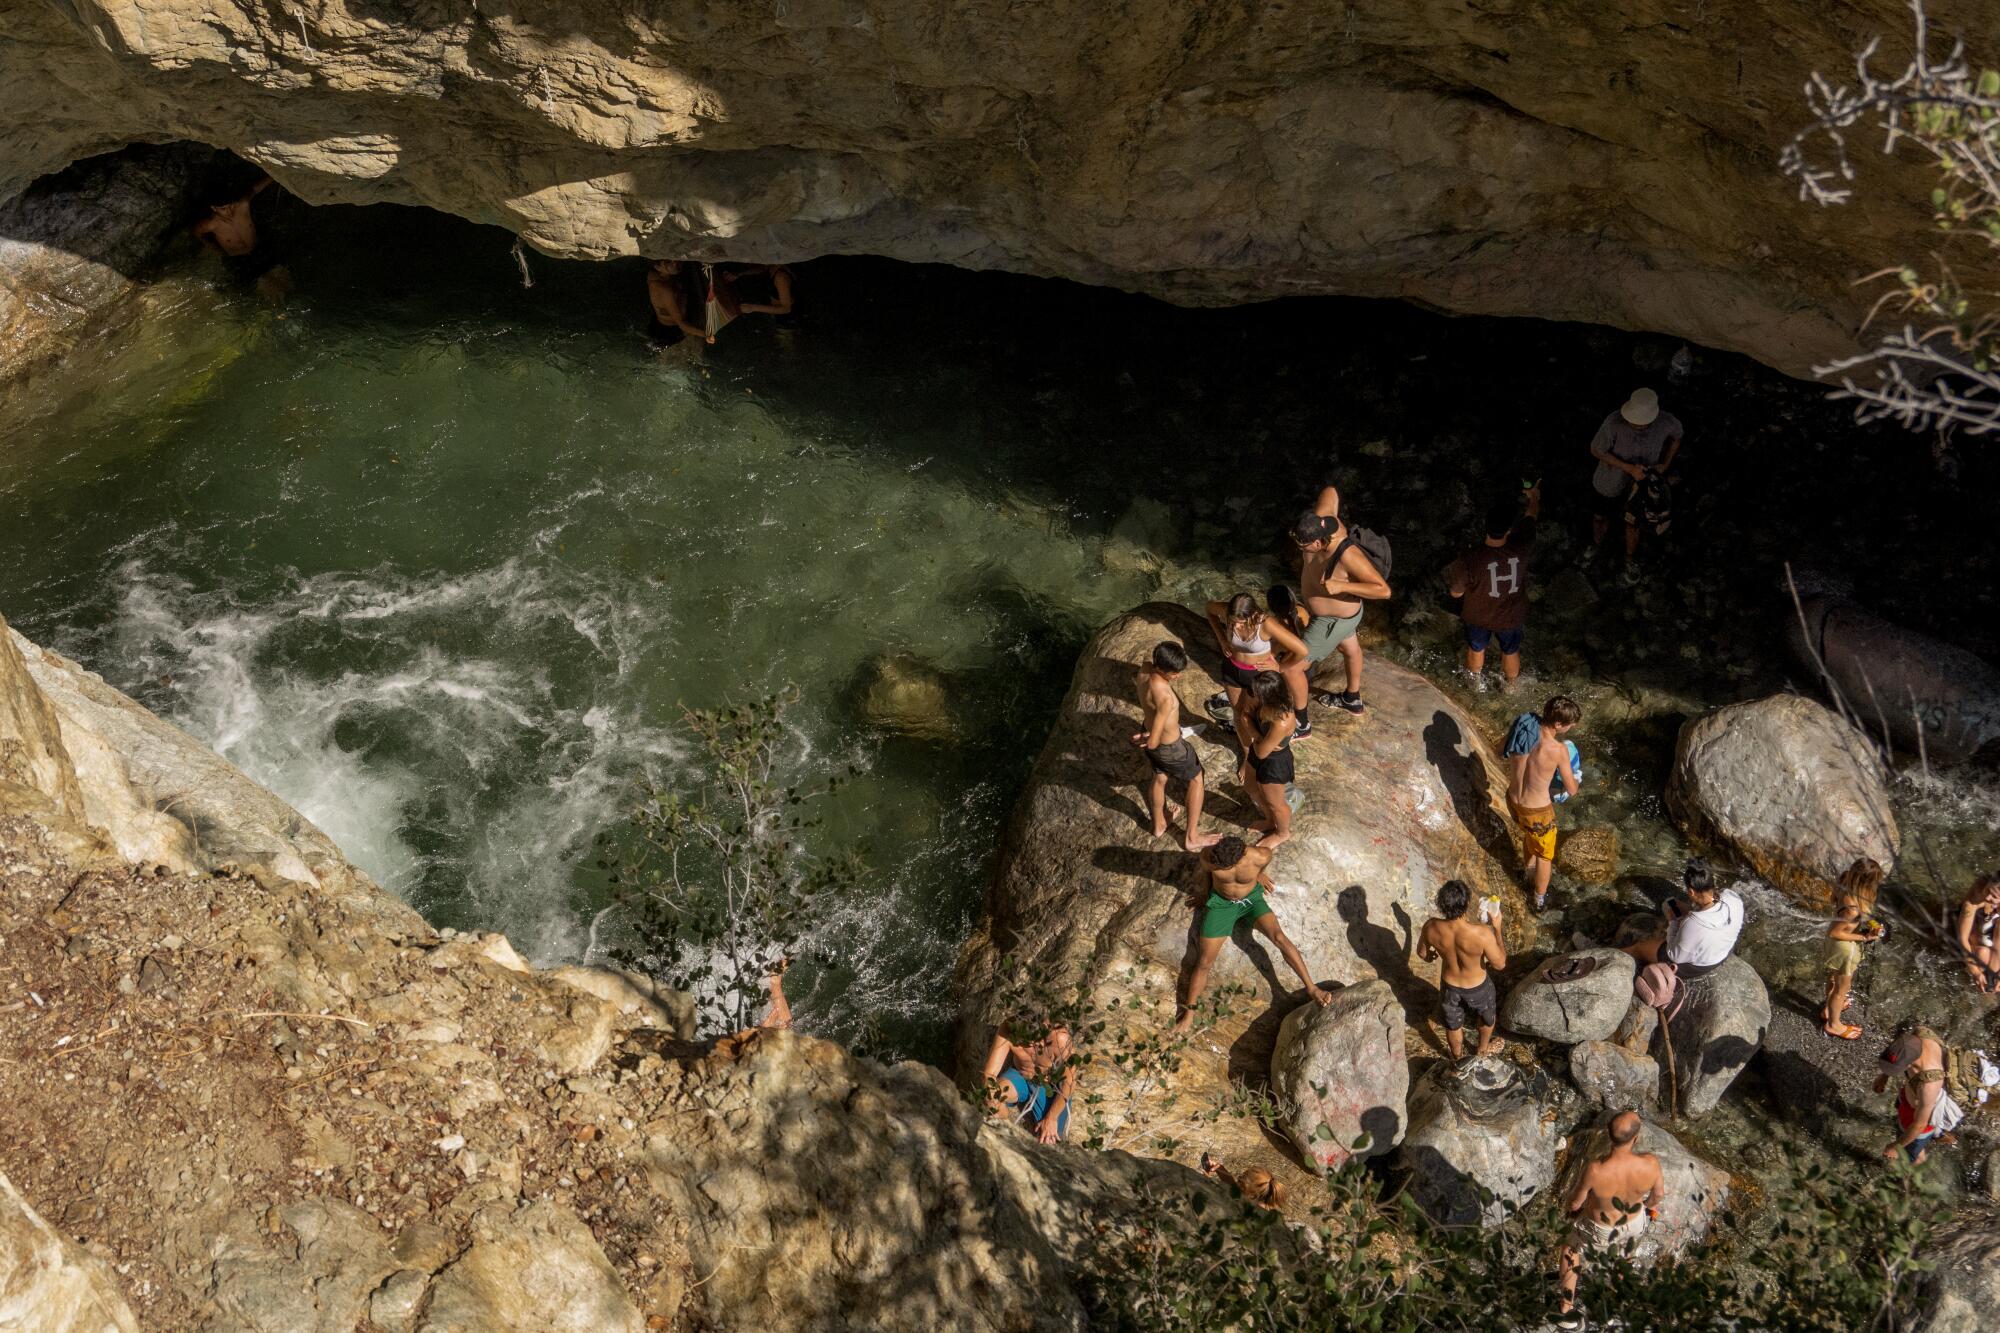 A weekend crowd gathers at Stoddard Canyon Falls and Slide in Mt. Baldy.